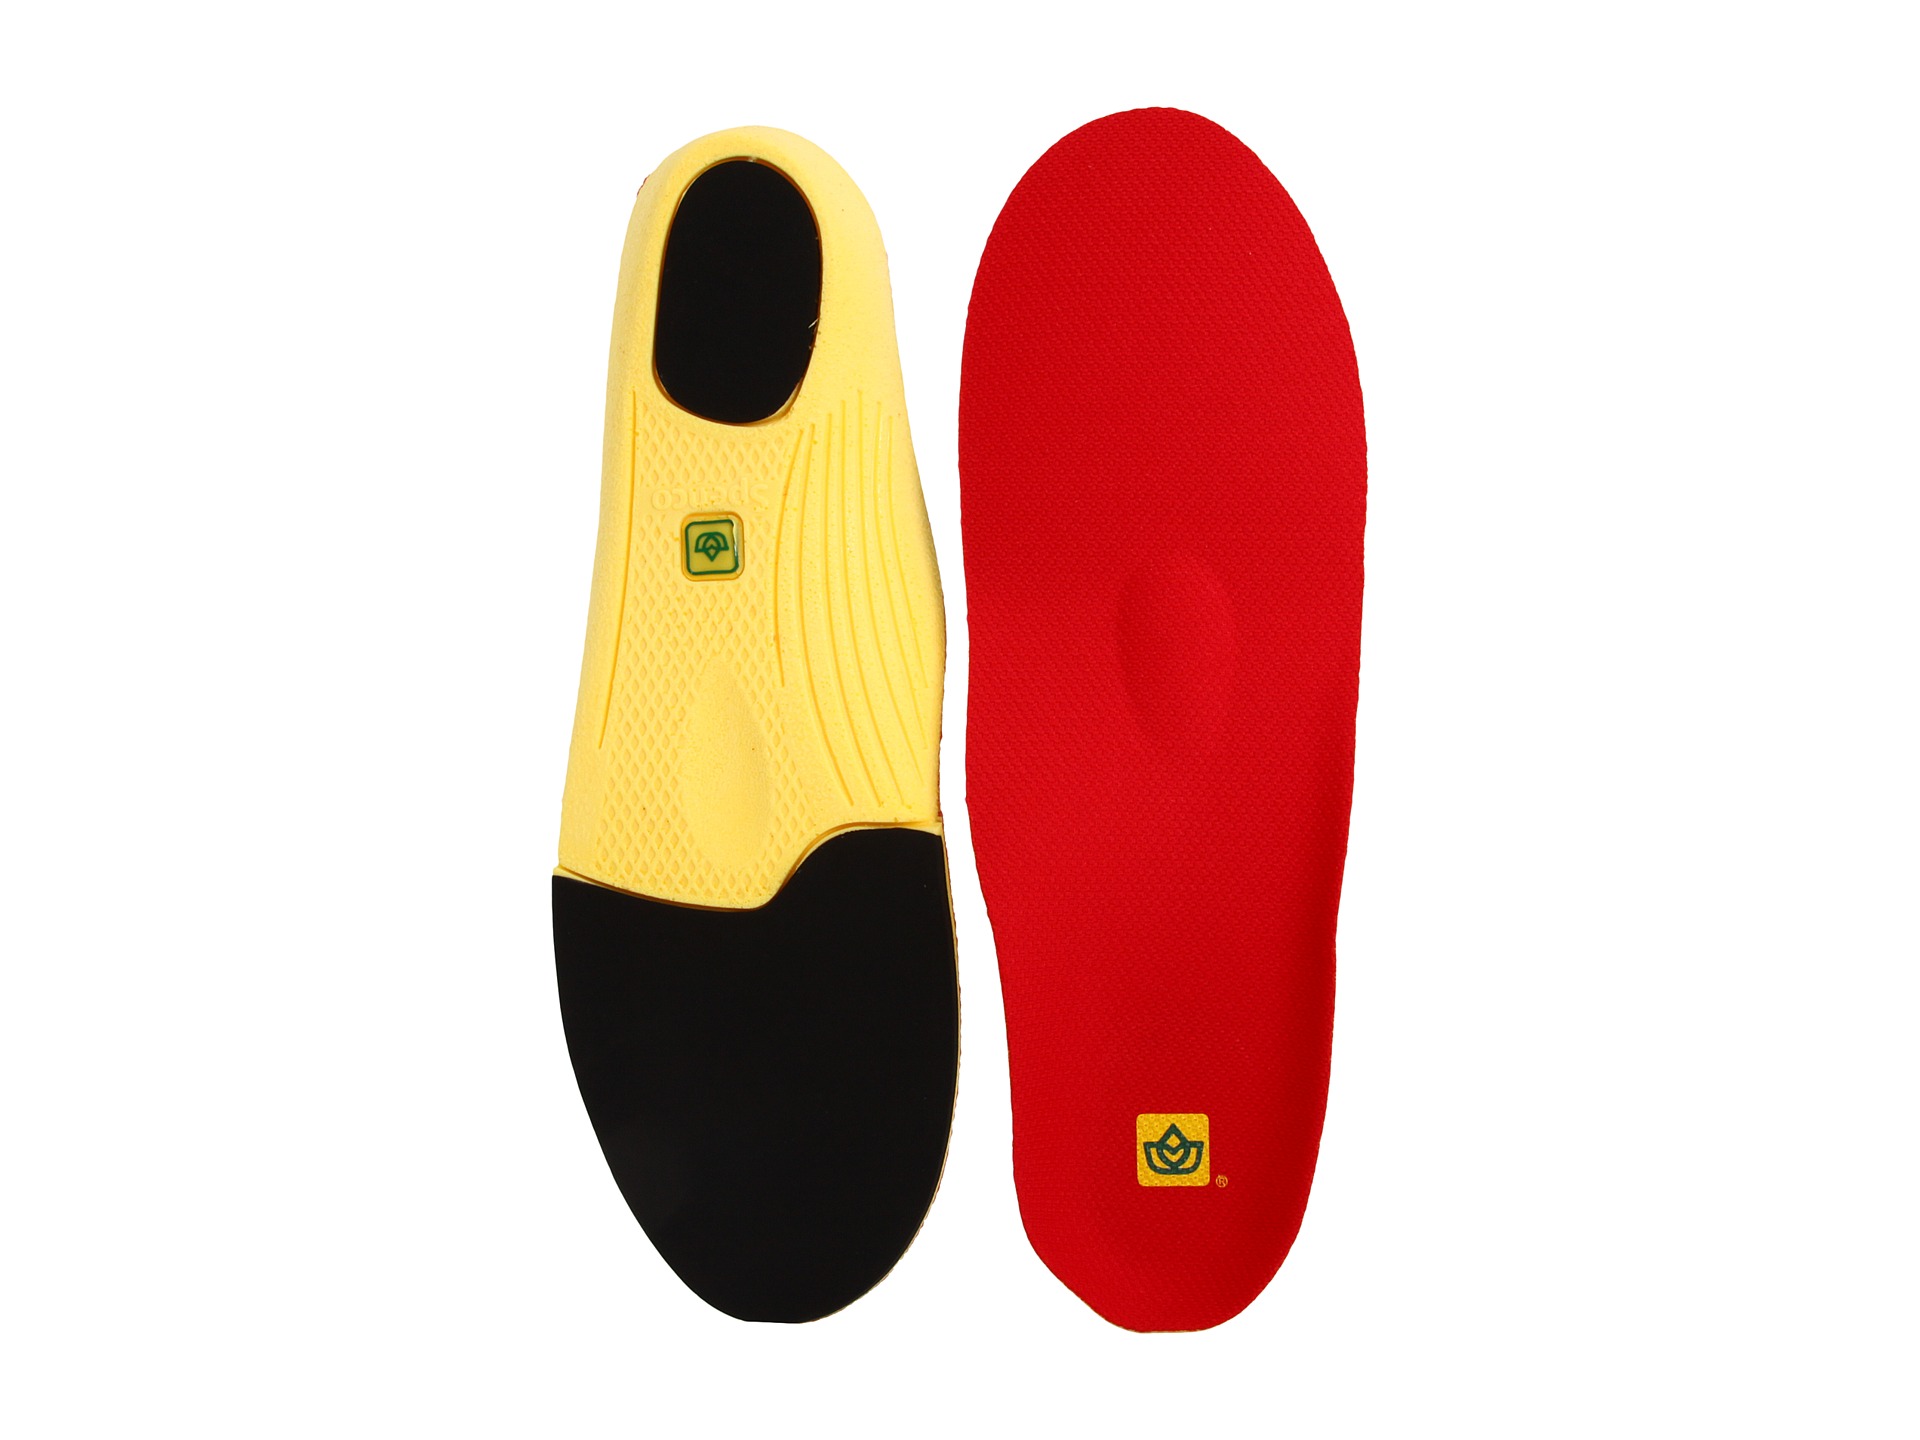 Spenco PolySorb Walker/Runner Insole - Zappos.com Free Shipping BOTH Ways